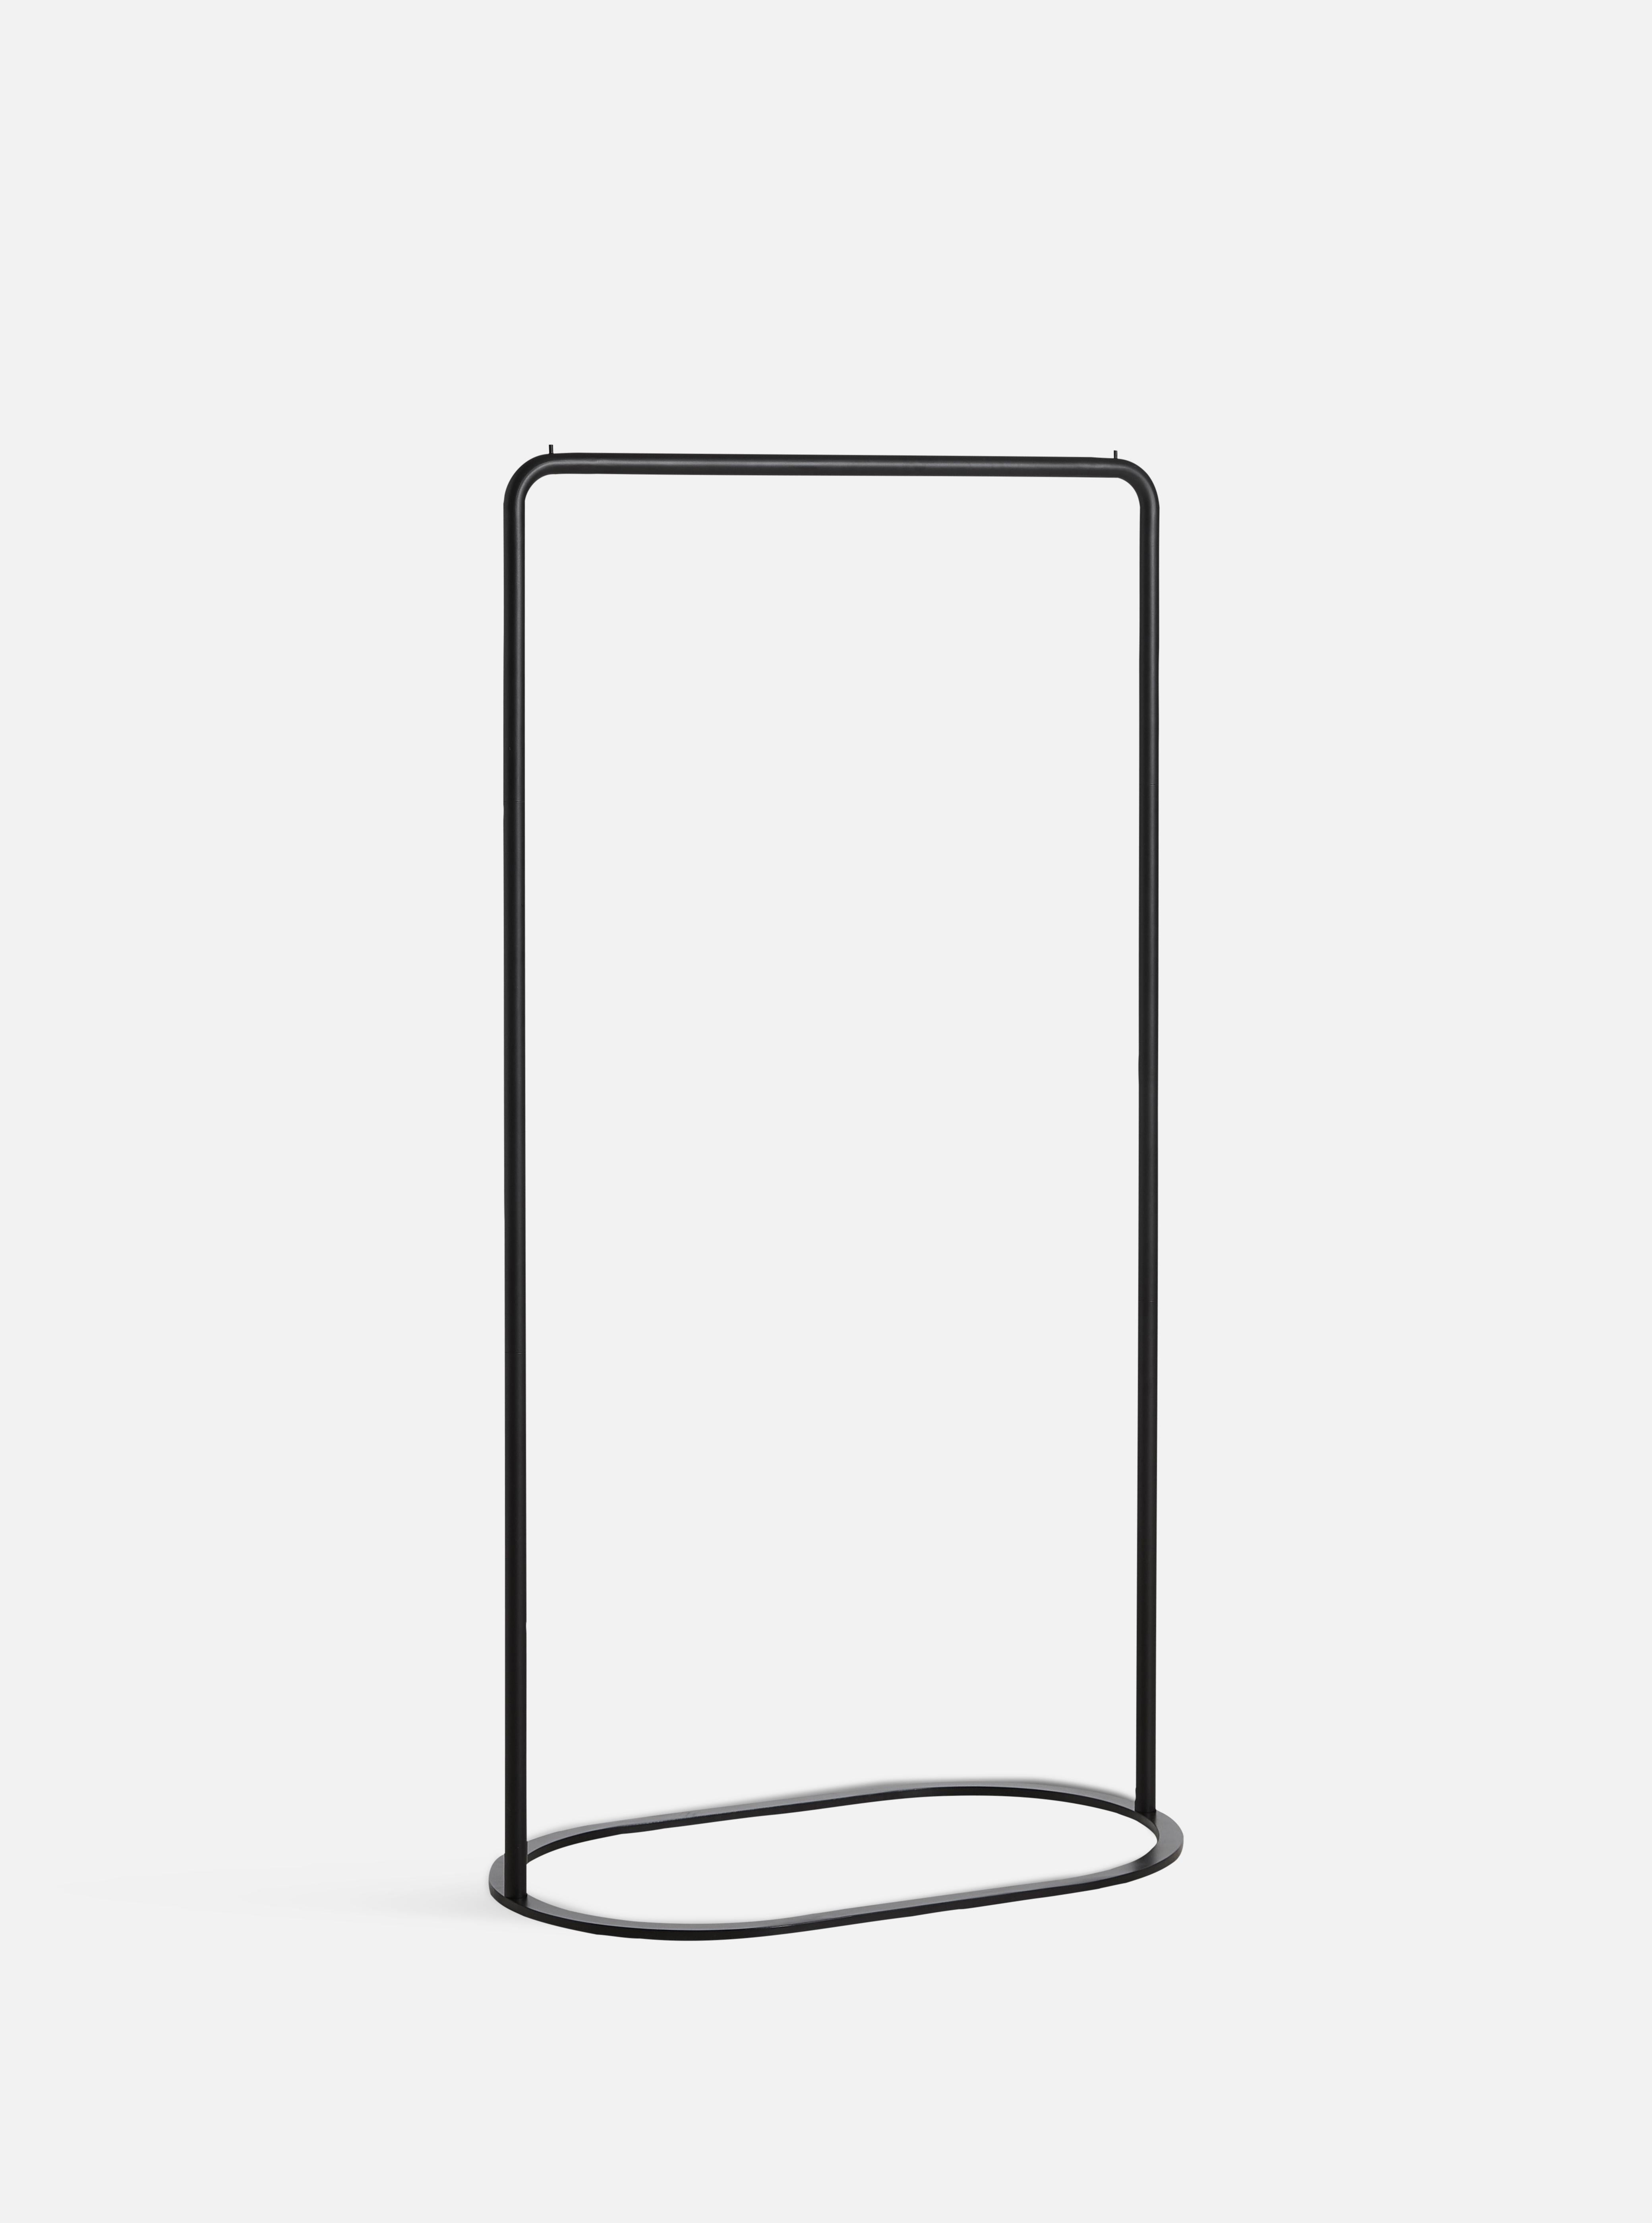 O & O clothes rack large by Christine Rathmann.
Materials: Metal.
Dimensions: D 48 x W 81 x H 159 cm.
Also available in different dimensions.

The founders, Mia and Torben Koed, decided to put their 30 years of experience into a new project. It